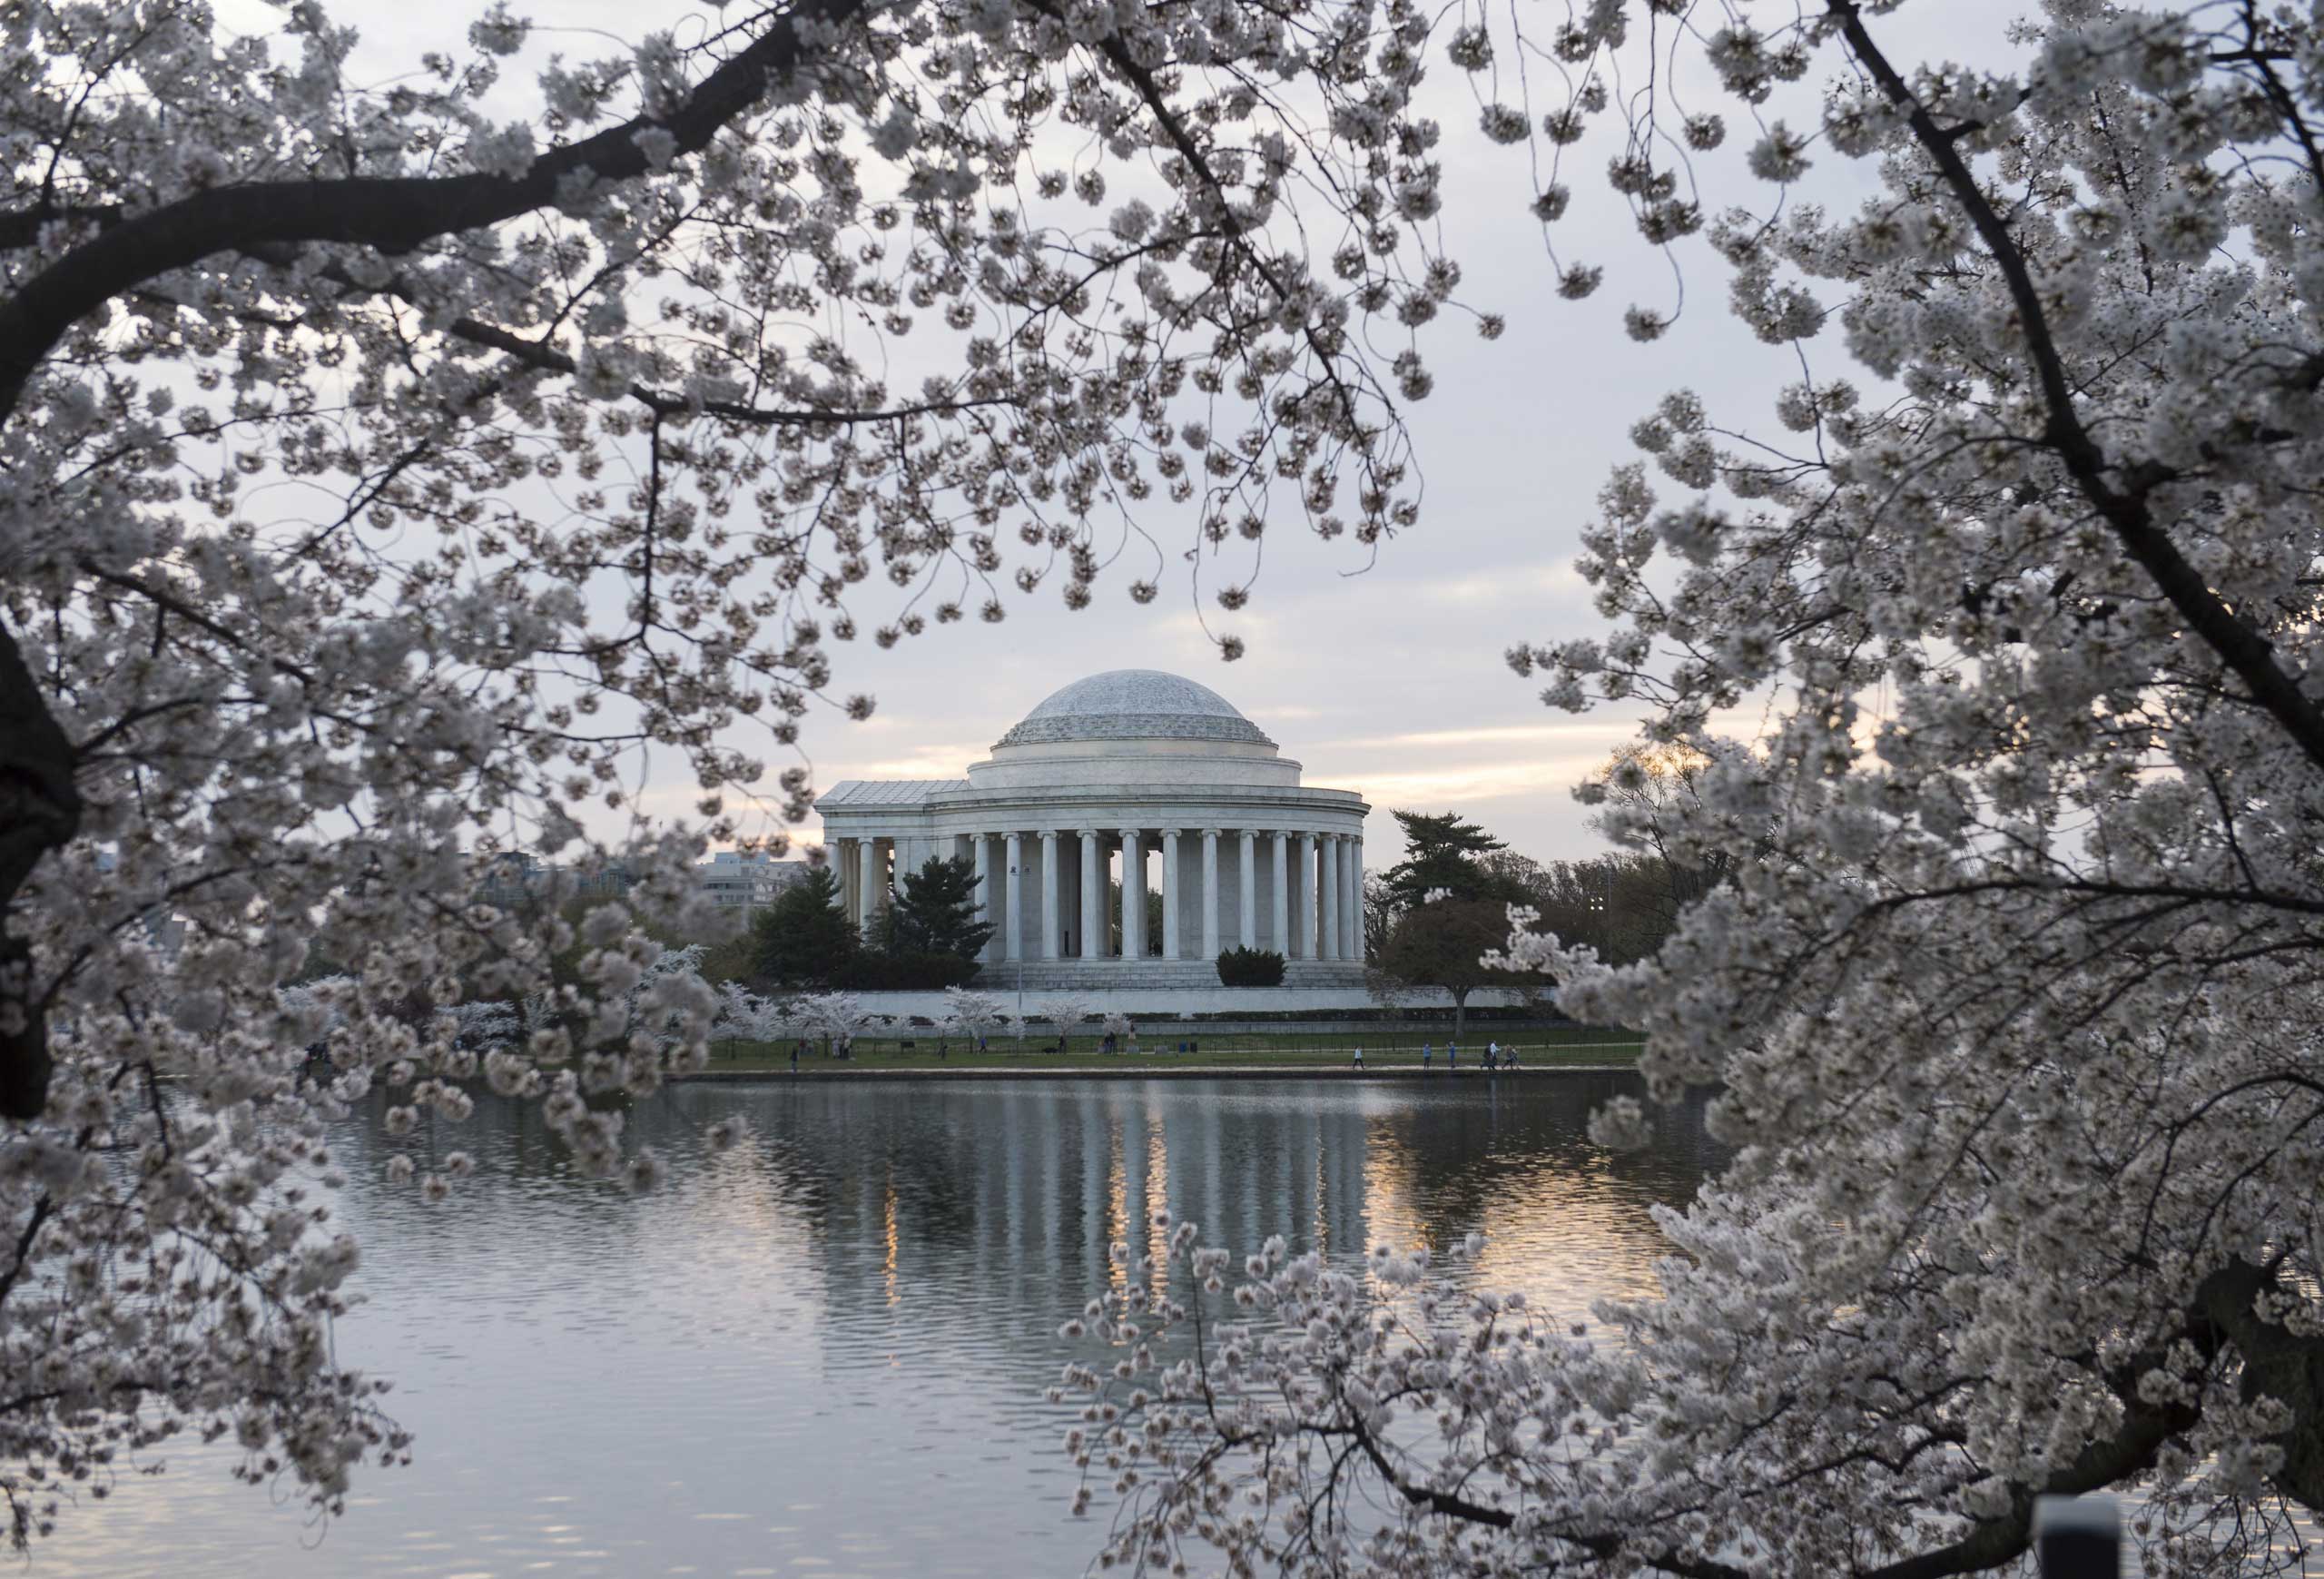 Cherry trees blossom around the Tidal Basin at sunrise near the Jefferson Memorial on the National Mall in Washington, D.C., April 11, 2015.